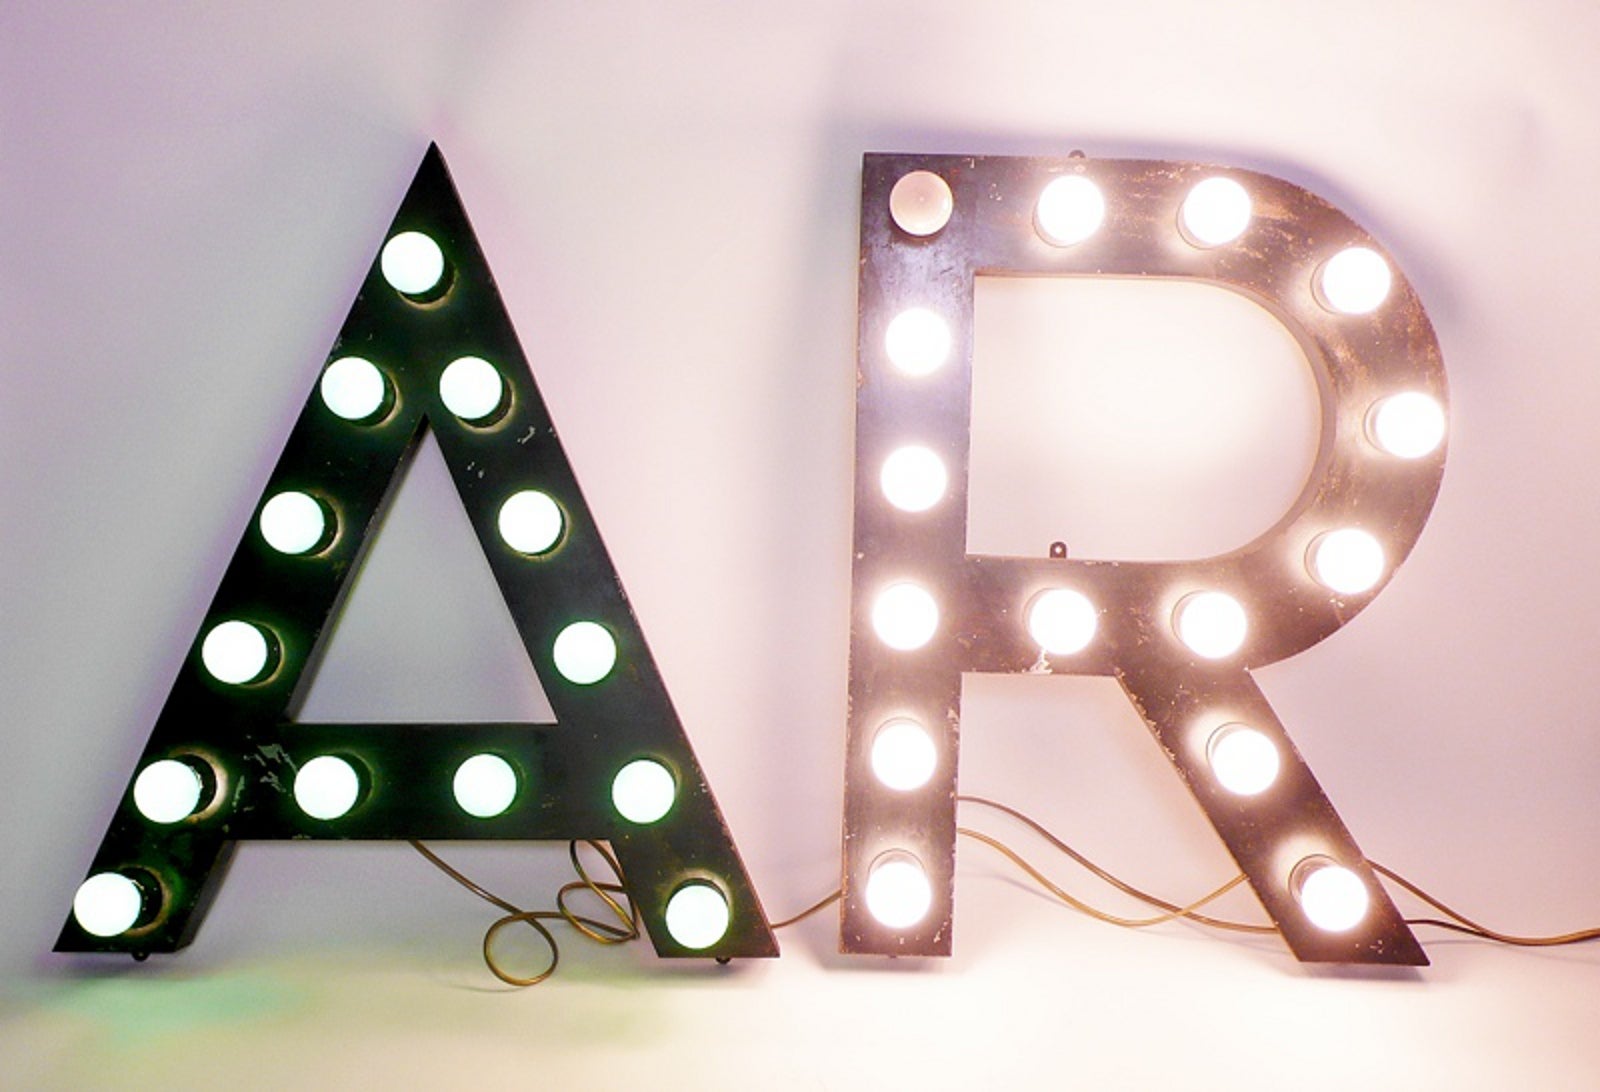 Painted Tin Letters Rewired With Bulbs Used for a Theater Sign